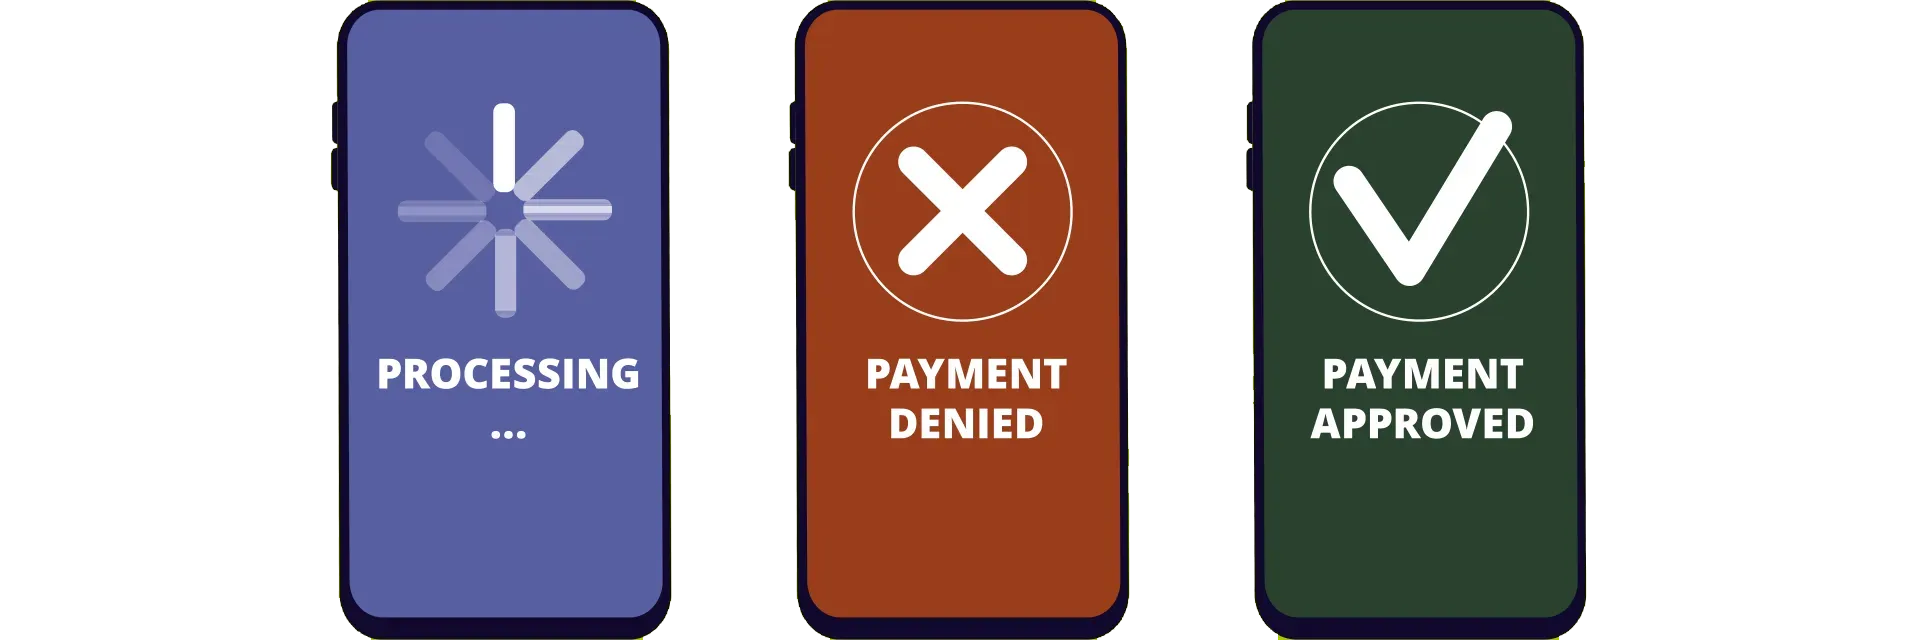 Monitoring of payments with "Denied Party Check" for MultiCash